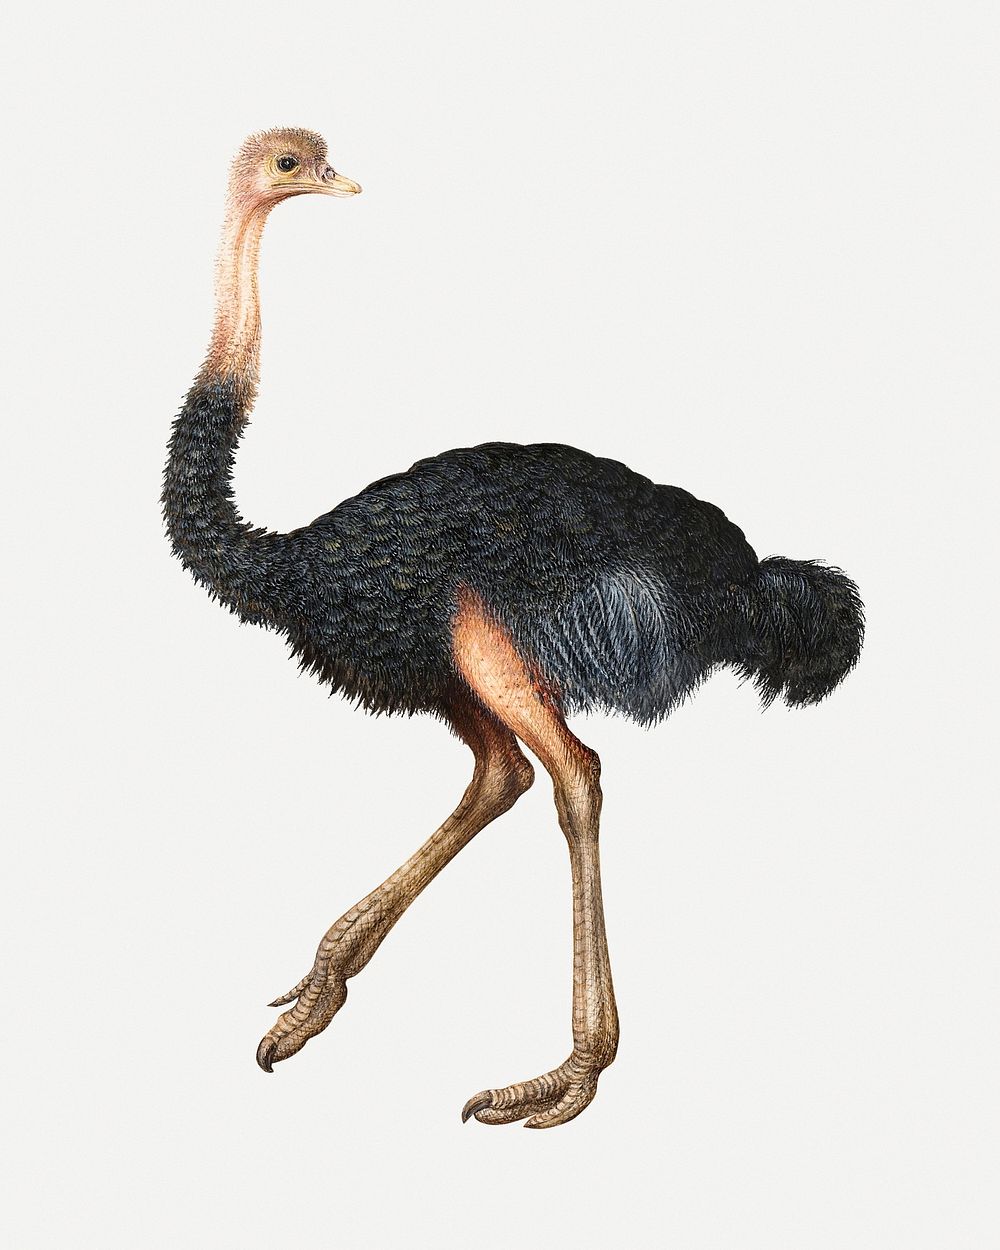 Ostrich animal painting, remixed from artworks by Joris Hoefnagel